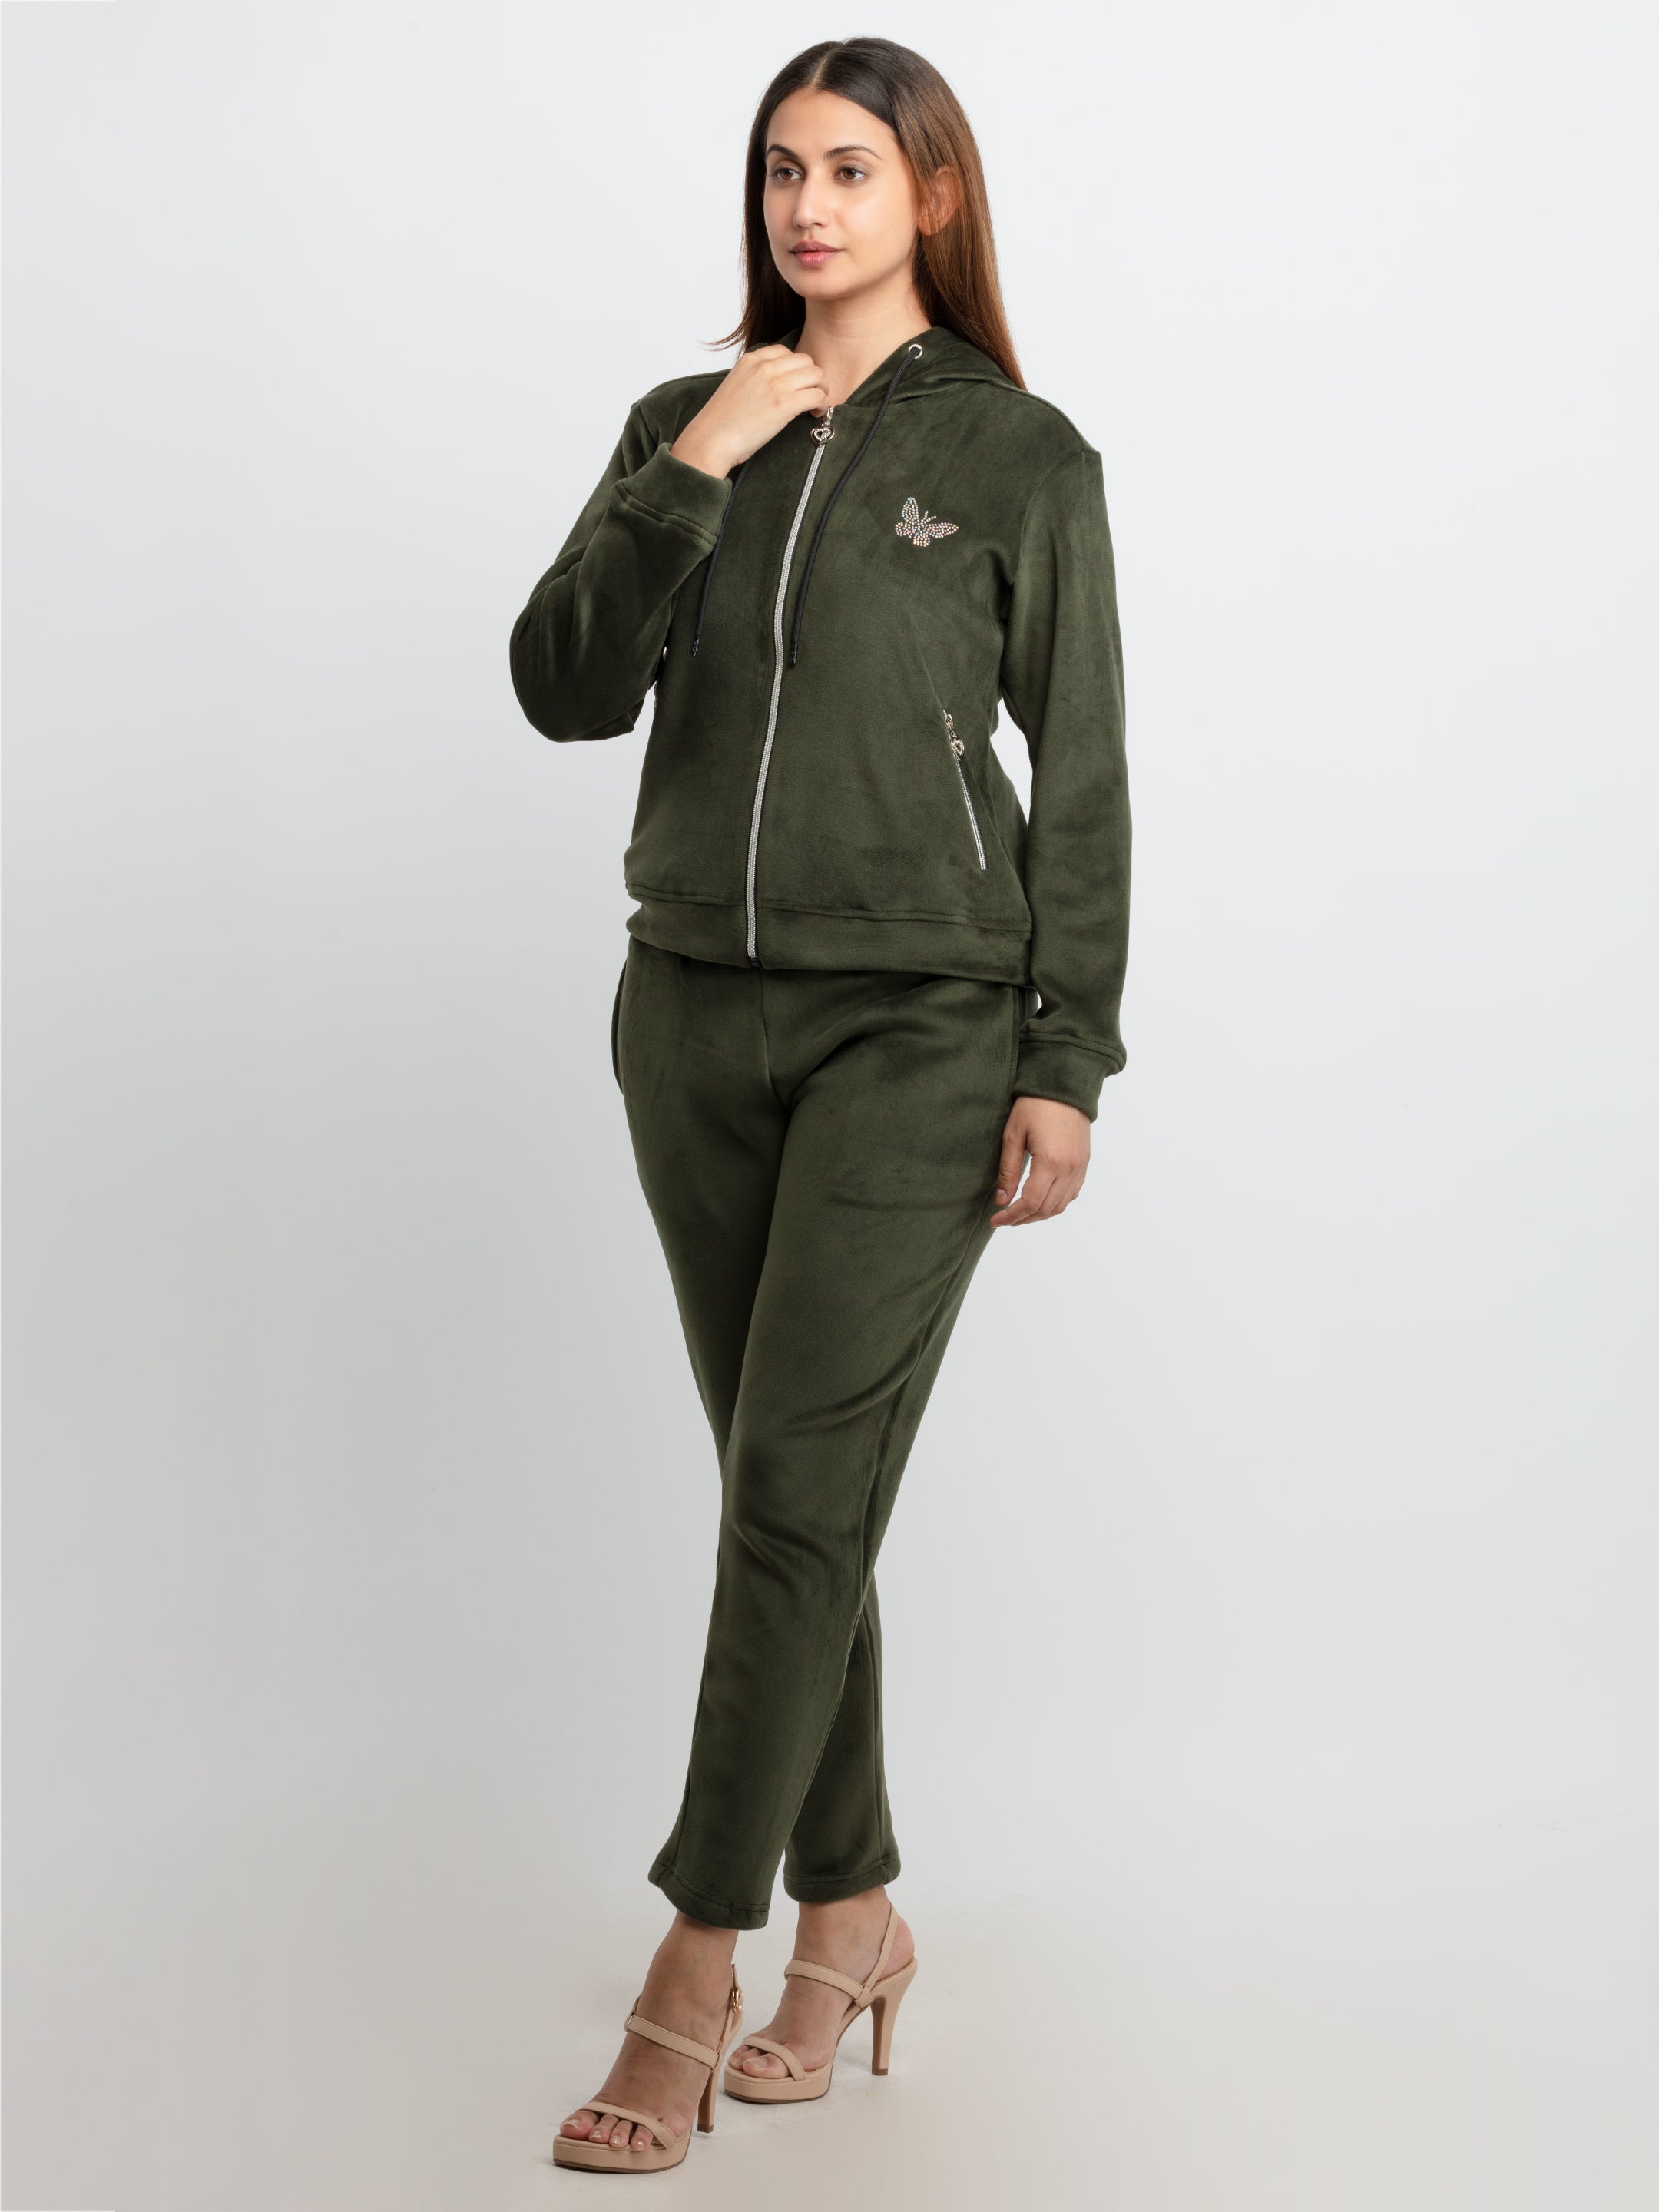 Womens Solid Zipper Tracksuit - S / Olive / SQW-TRACKSUIT-22927-Olive